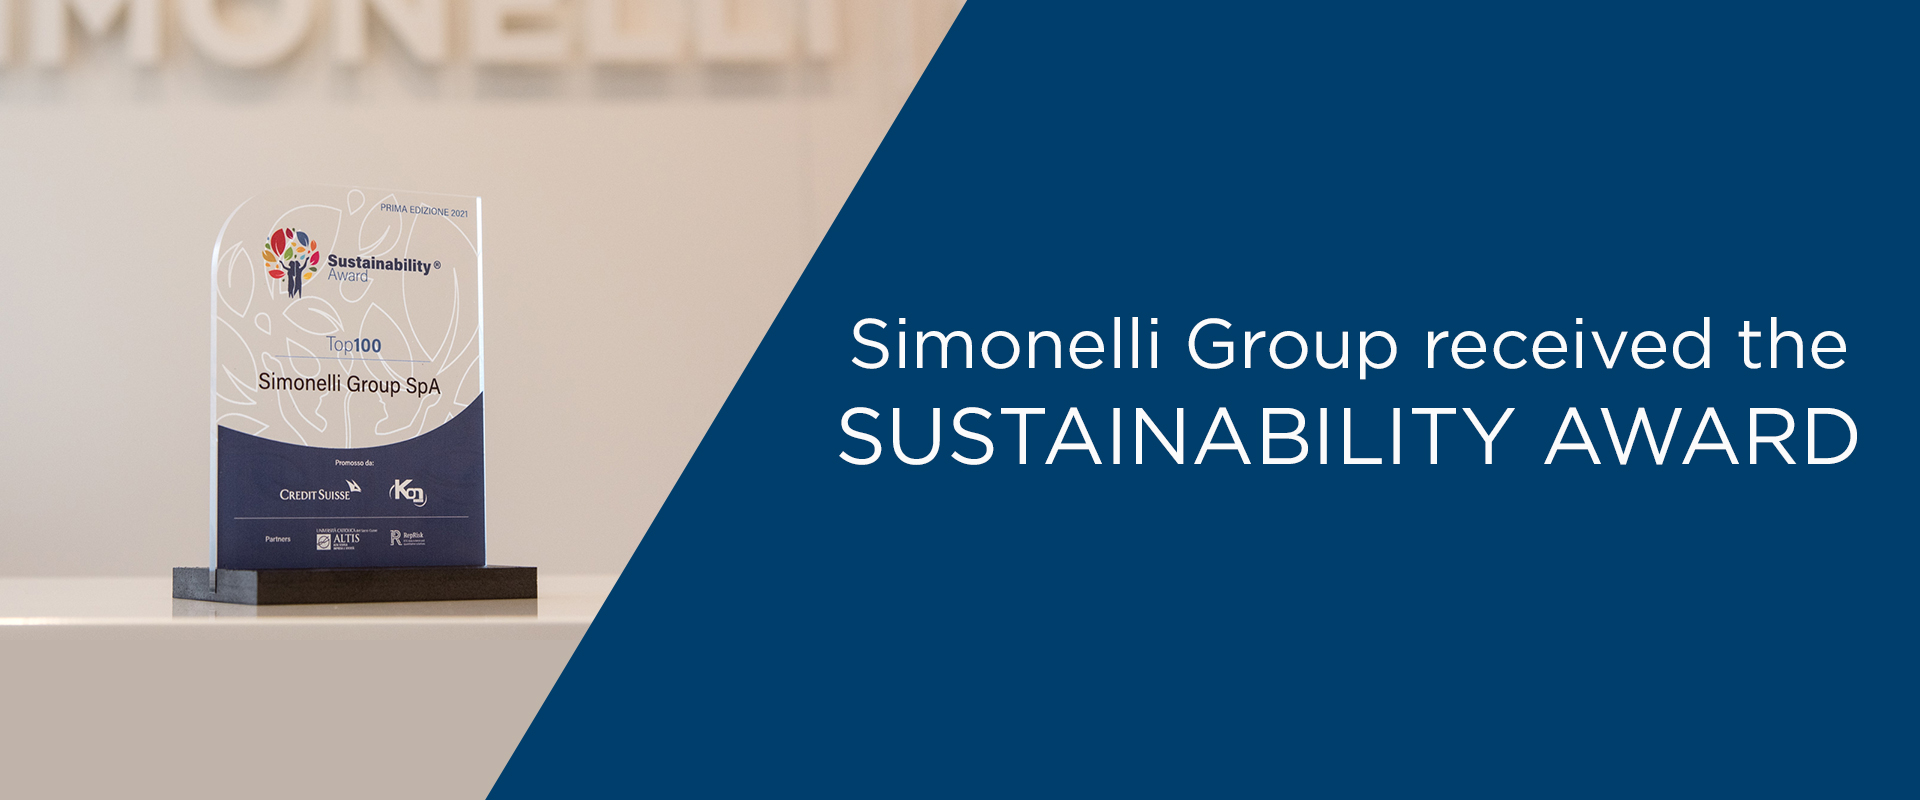 SIMONELLI GROUP RECEIVED THE “SUSTAINABILITY AWARD”